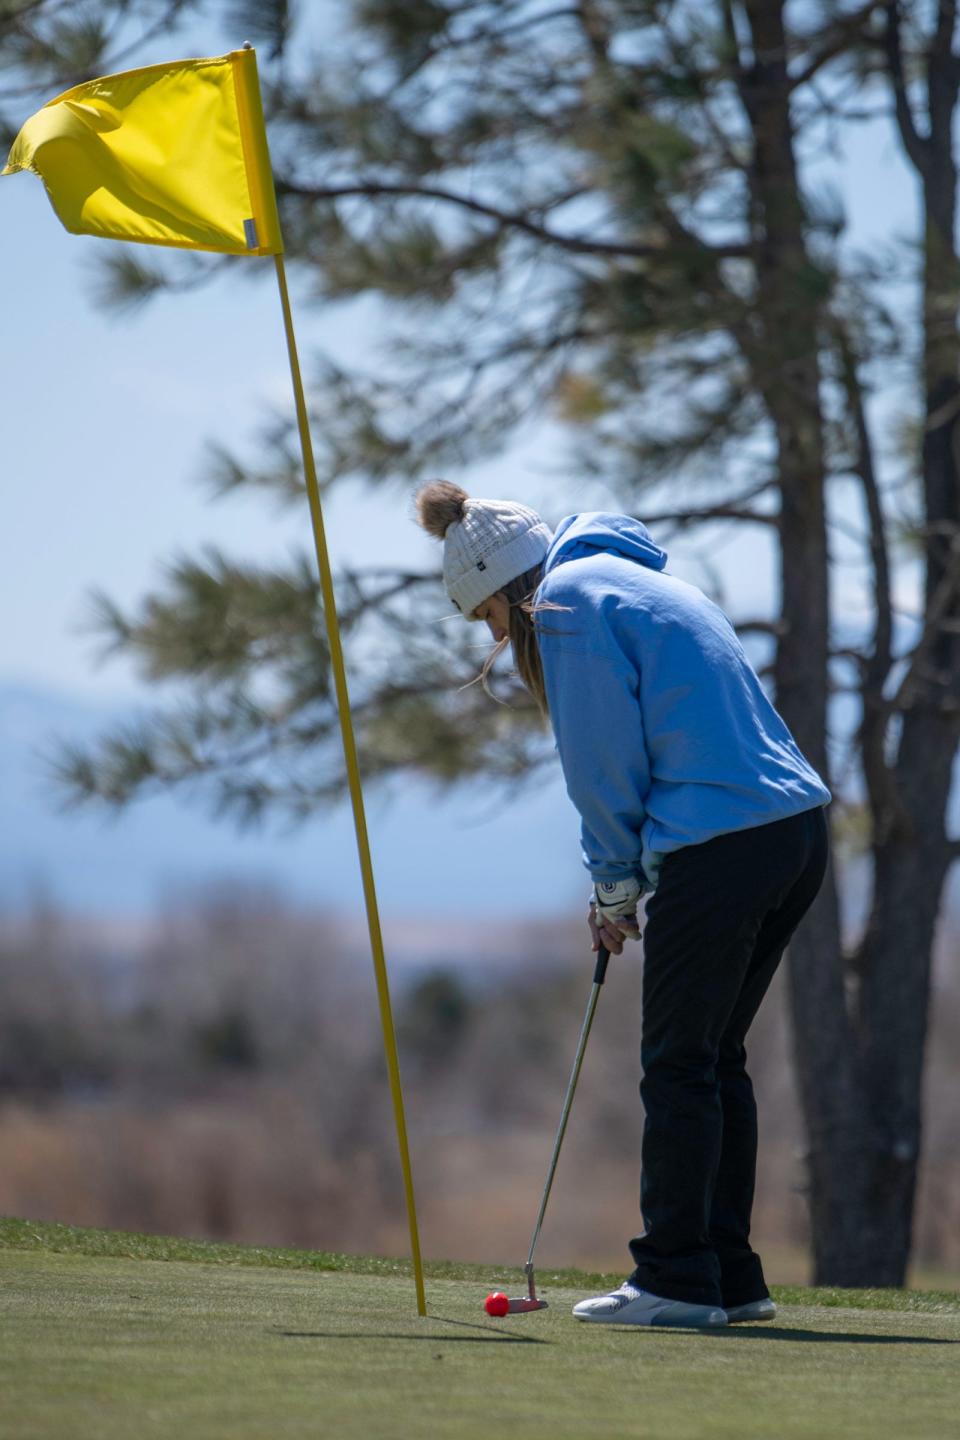 Pueblo West's Gianna Nardini lines up for a short putt on the 10th green during the Centennial girls golf tournament at Walking Stick Golf Course on Wednesday, April 6, 2022.